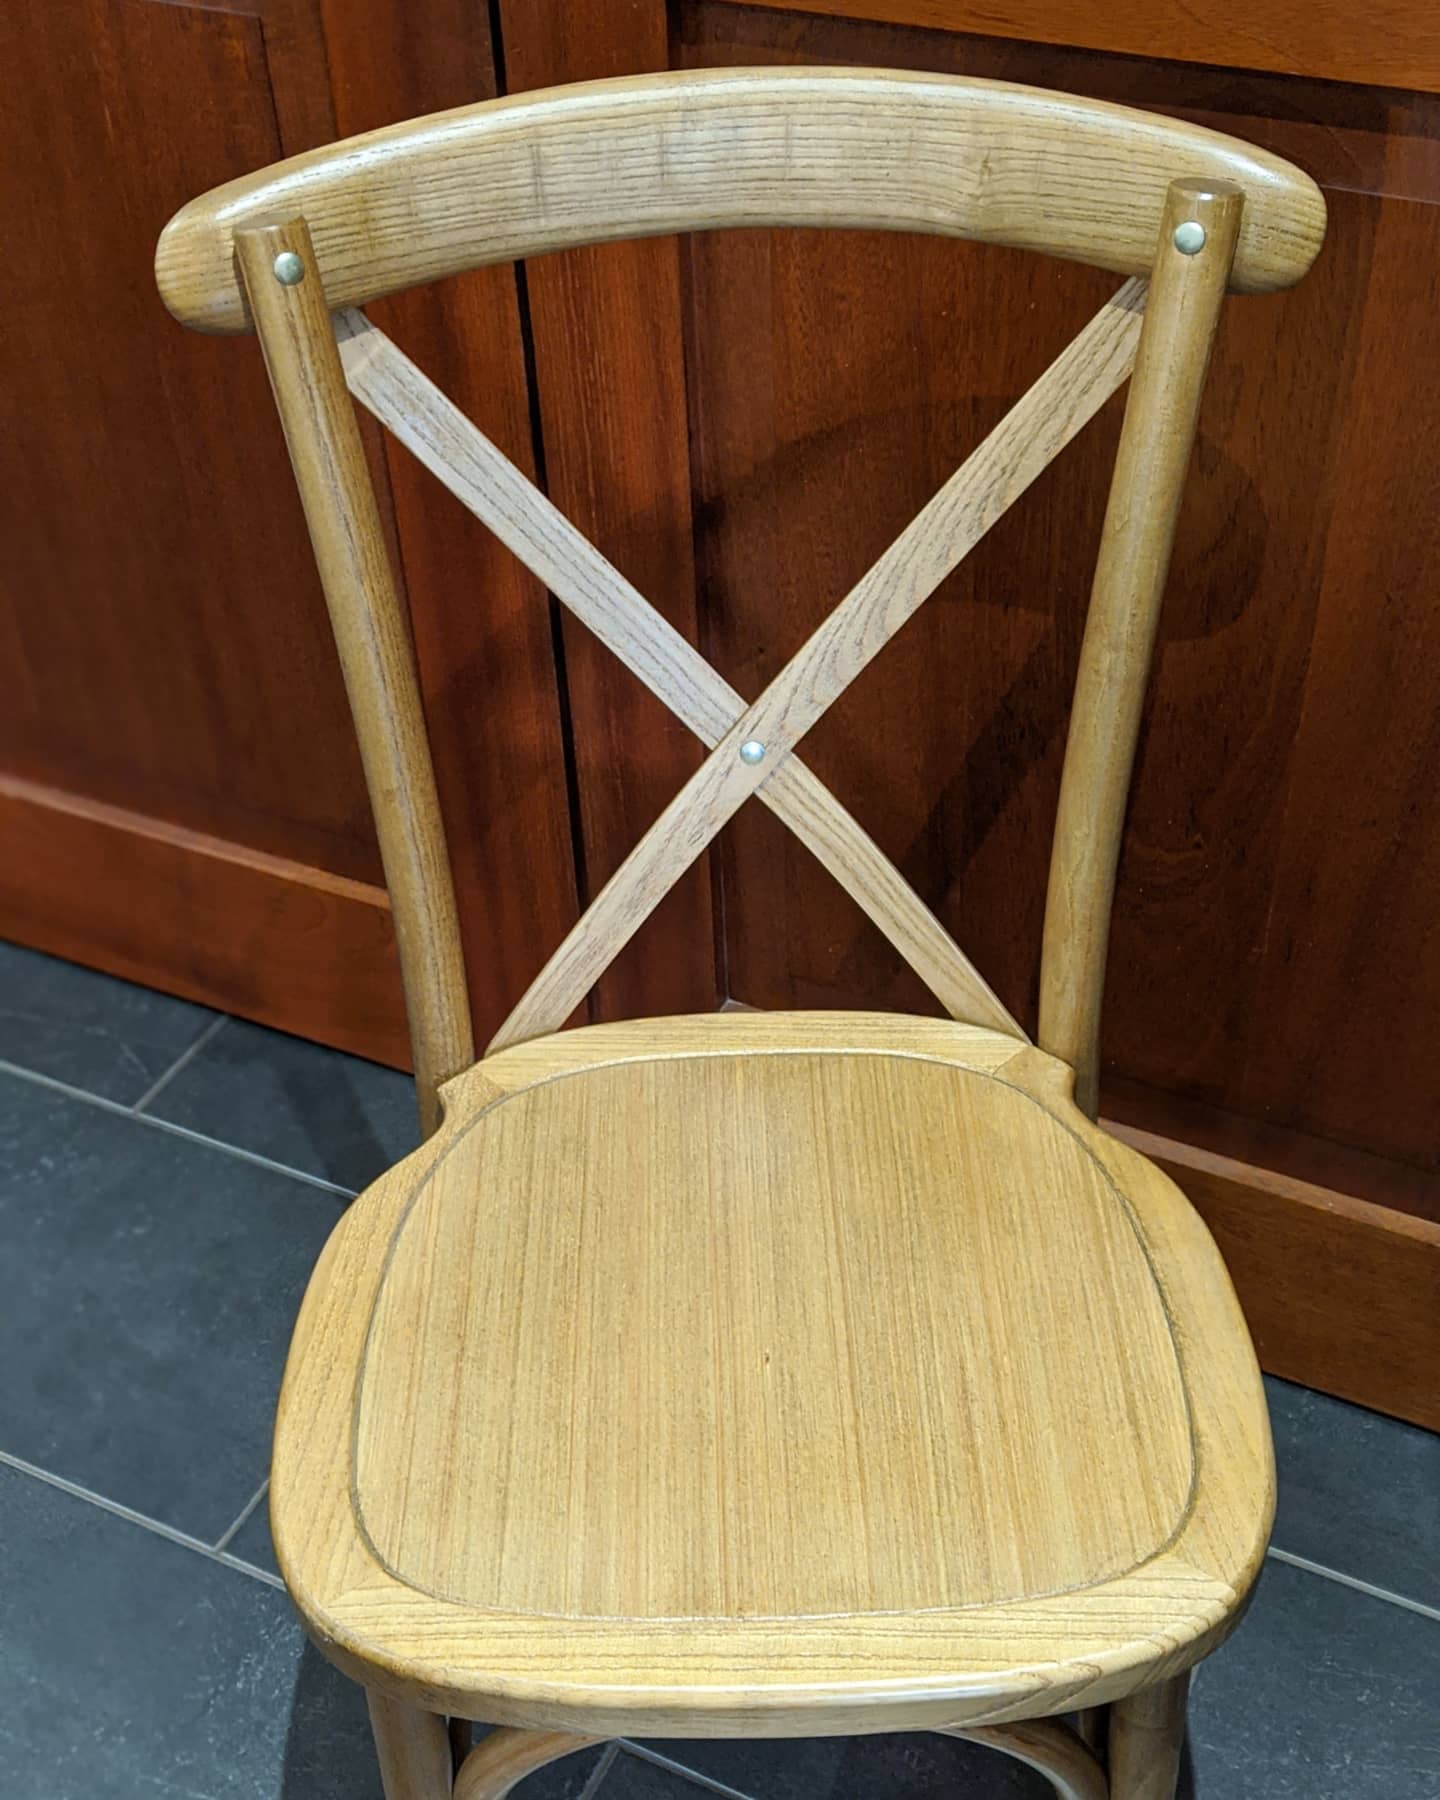 Cross back chair without seat cushion